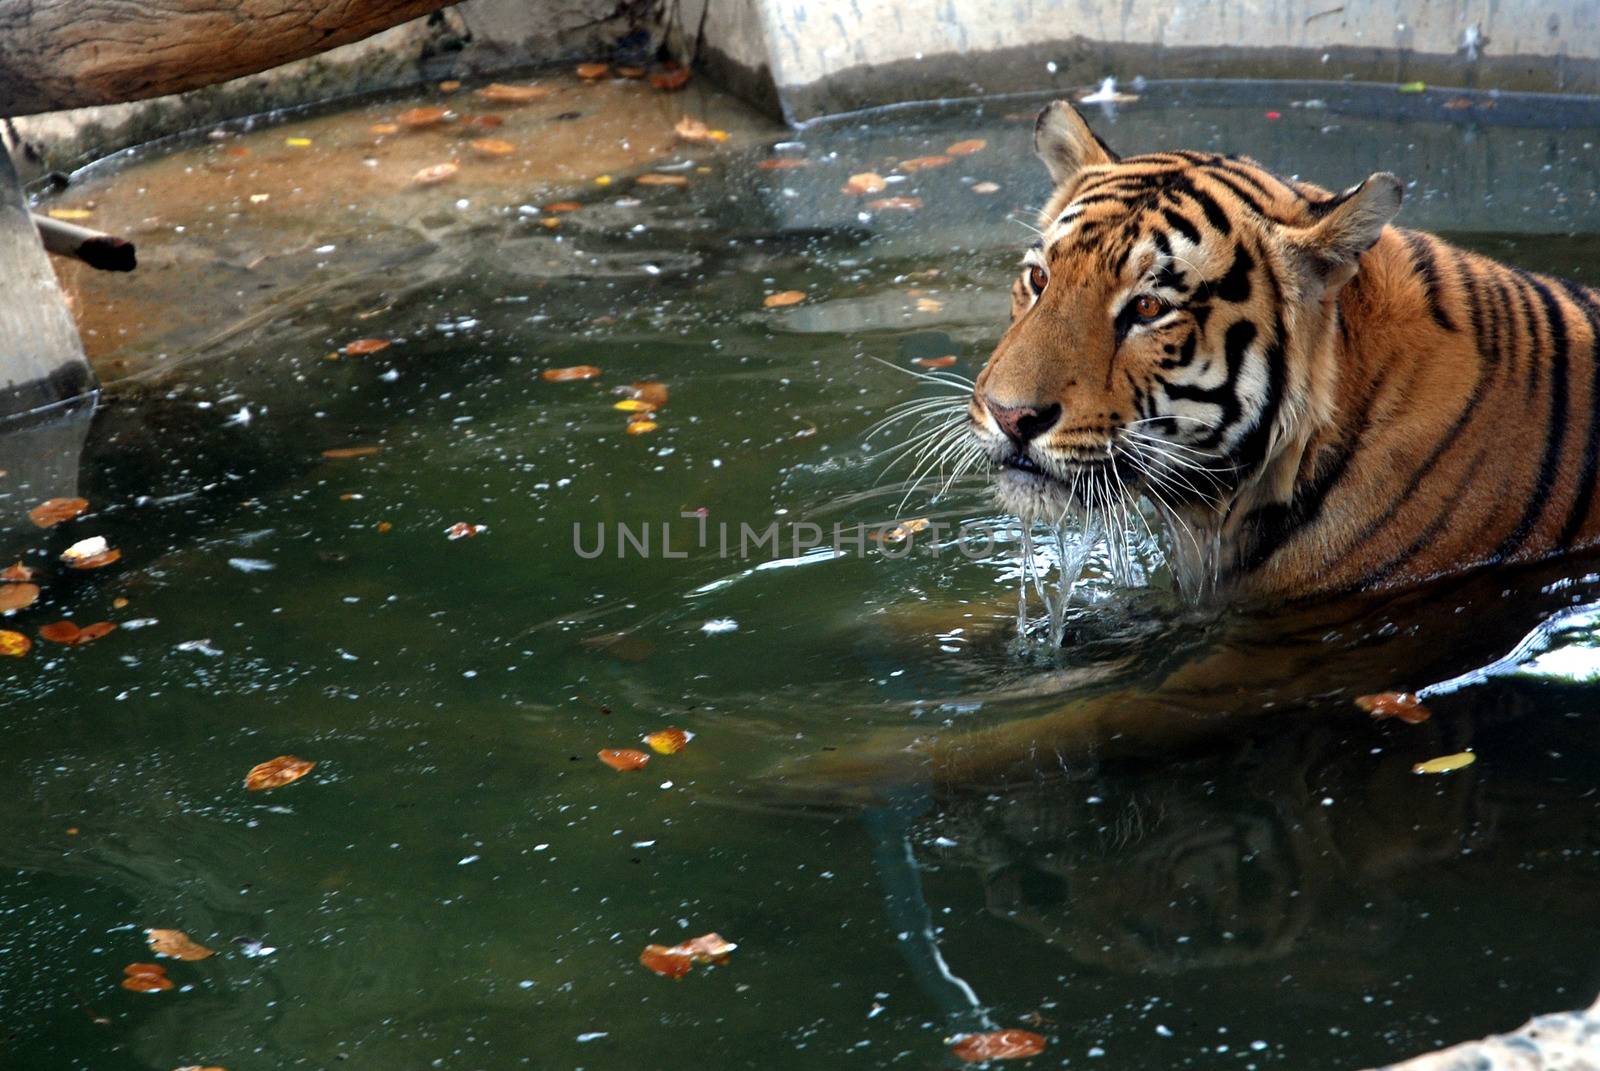 PAKISTAN, Karachi: A tiger braves the scorching heat wave on September 20, 2015 by taking a dip at the Zoological Garden in Karachi, Pakistan.